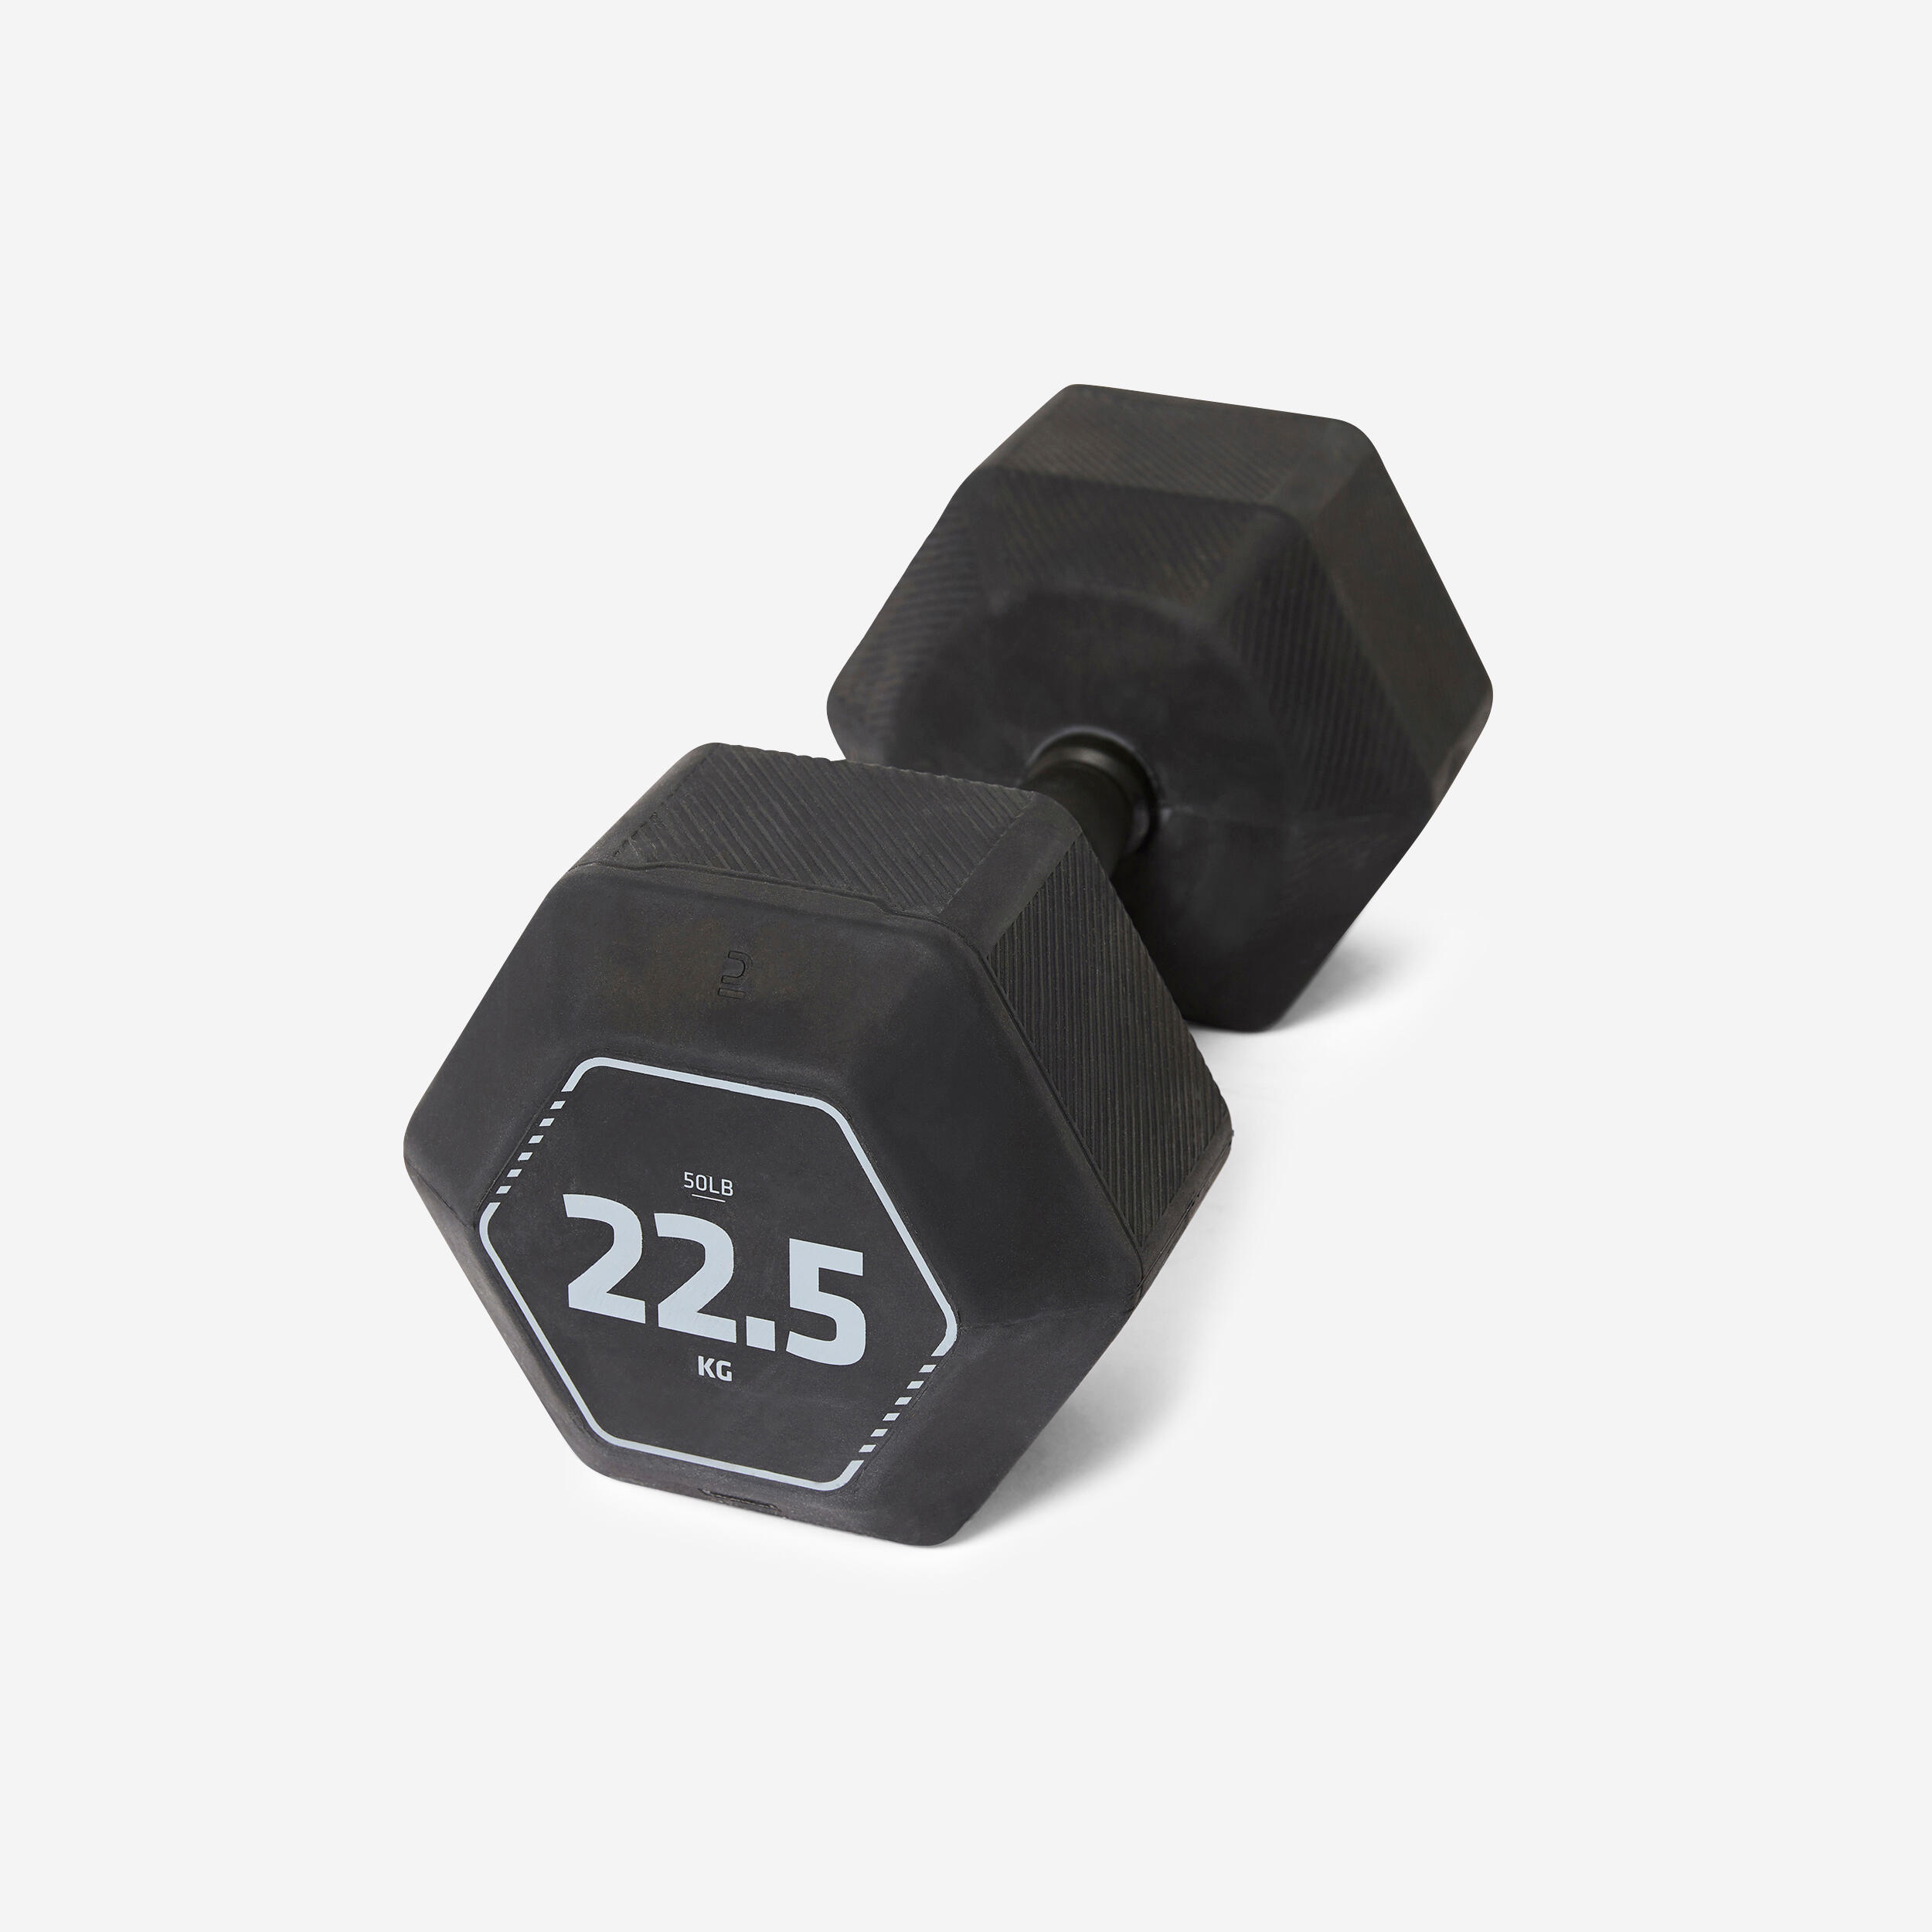 Corength Cross-training And Weight Training Hex Dumbbell 22.5kg - Black